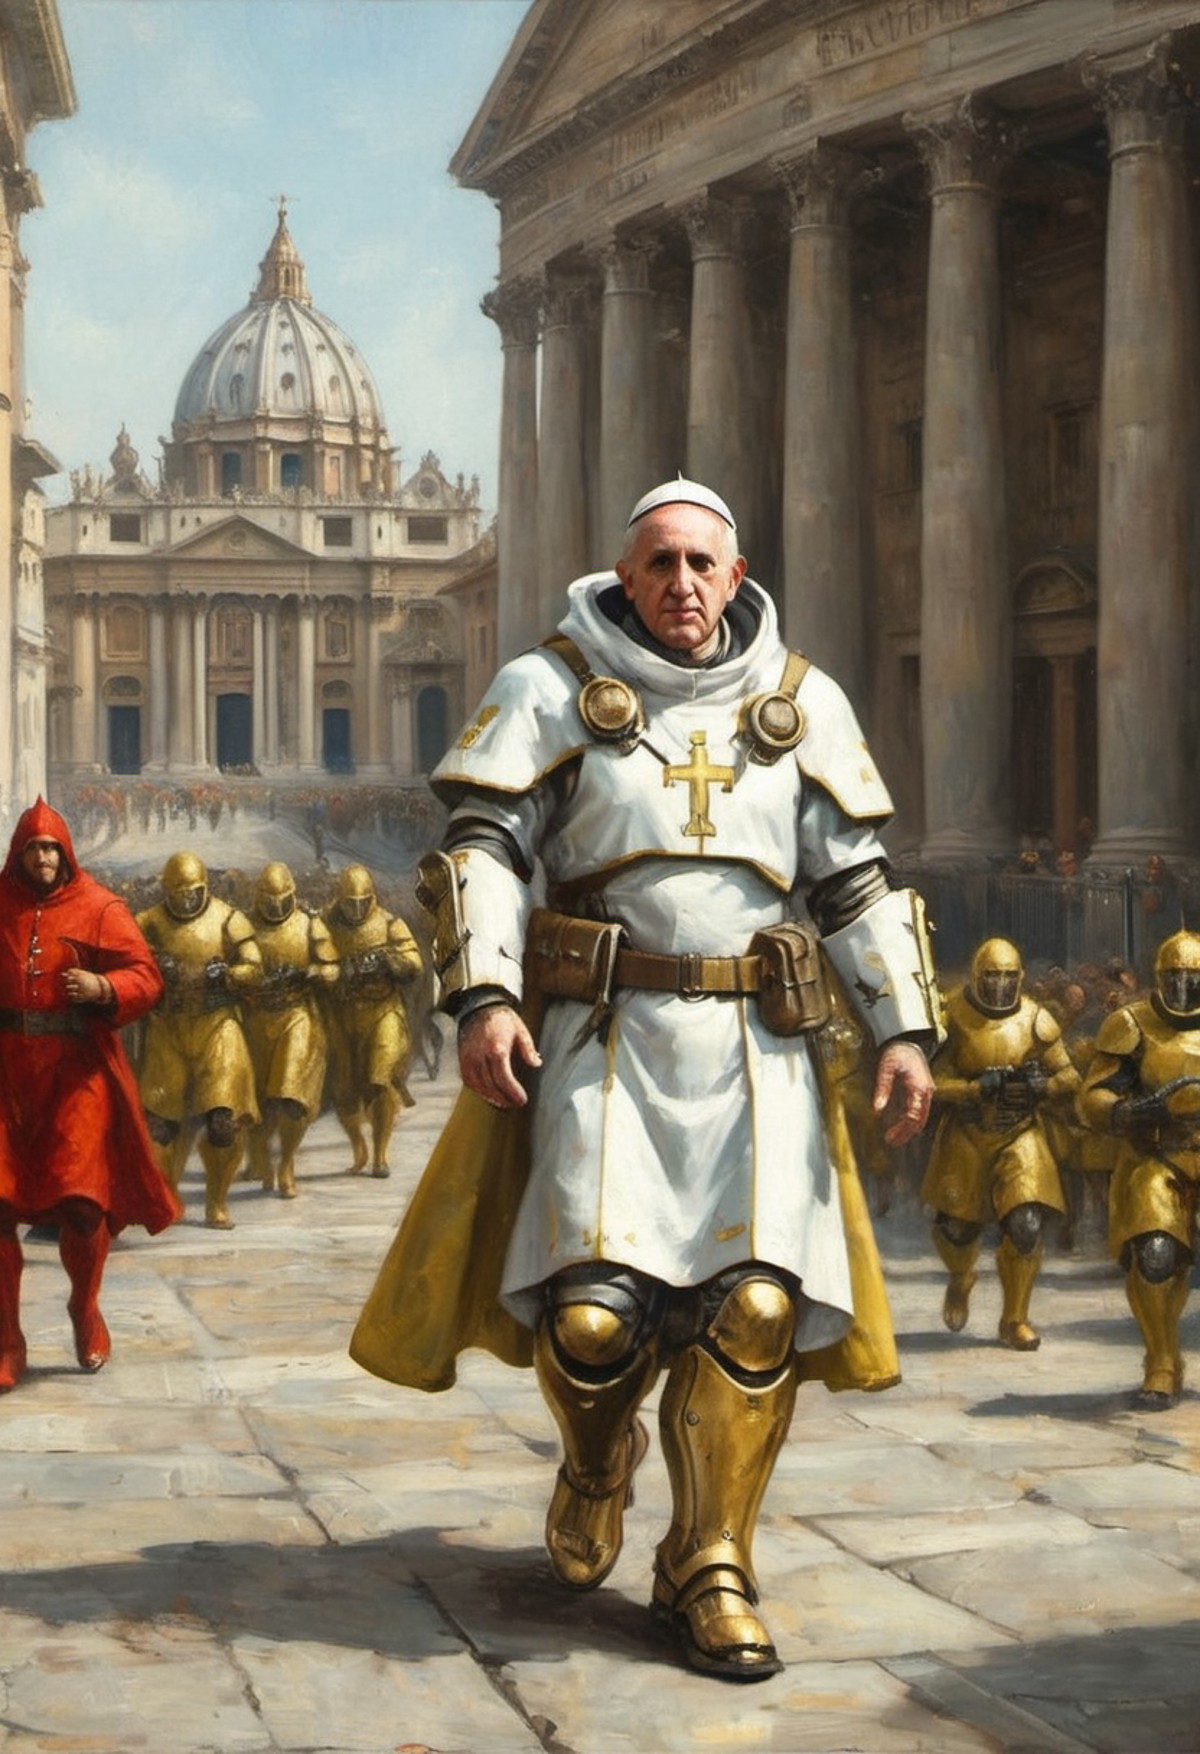 Pope Francis in (Fallout Power Armor:1.3) papal armor white and gold leading his cardinal-ninja soldiers in the courtyard ...